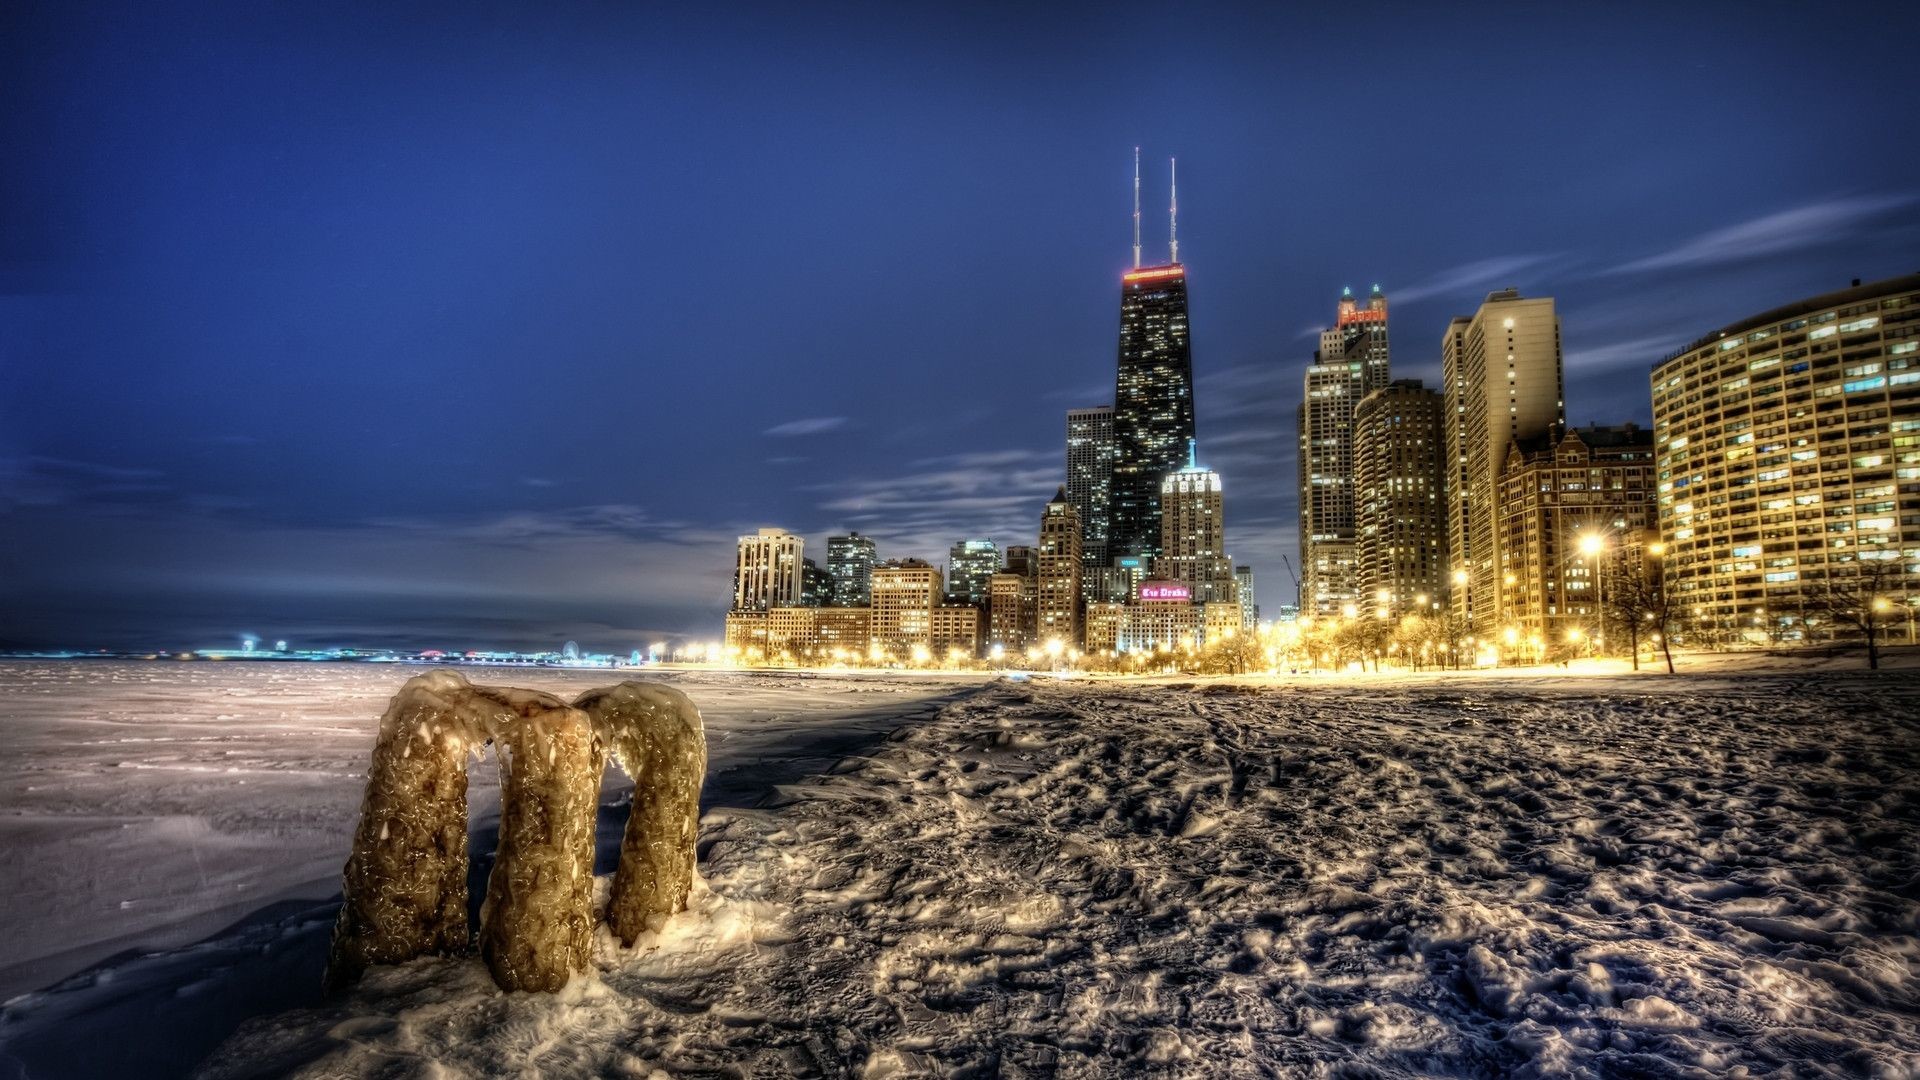 1920x1080 chicago wallpaper iphone 6 - Google Search